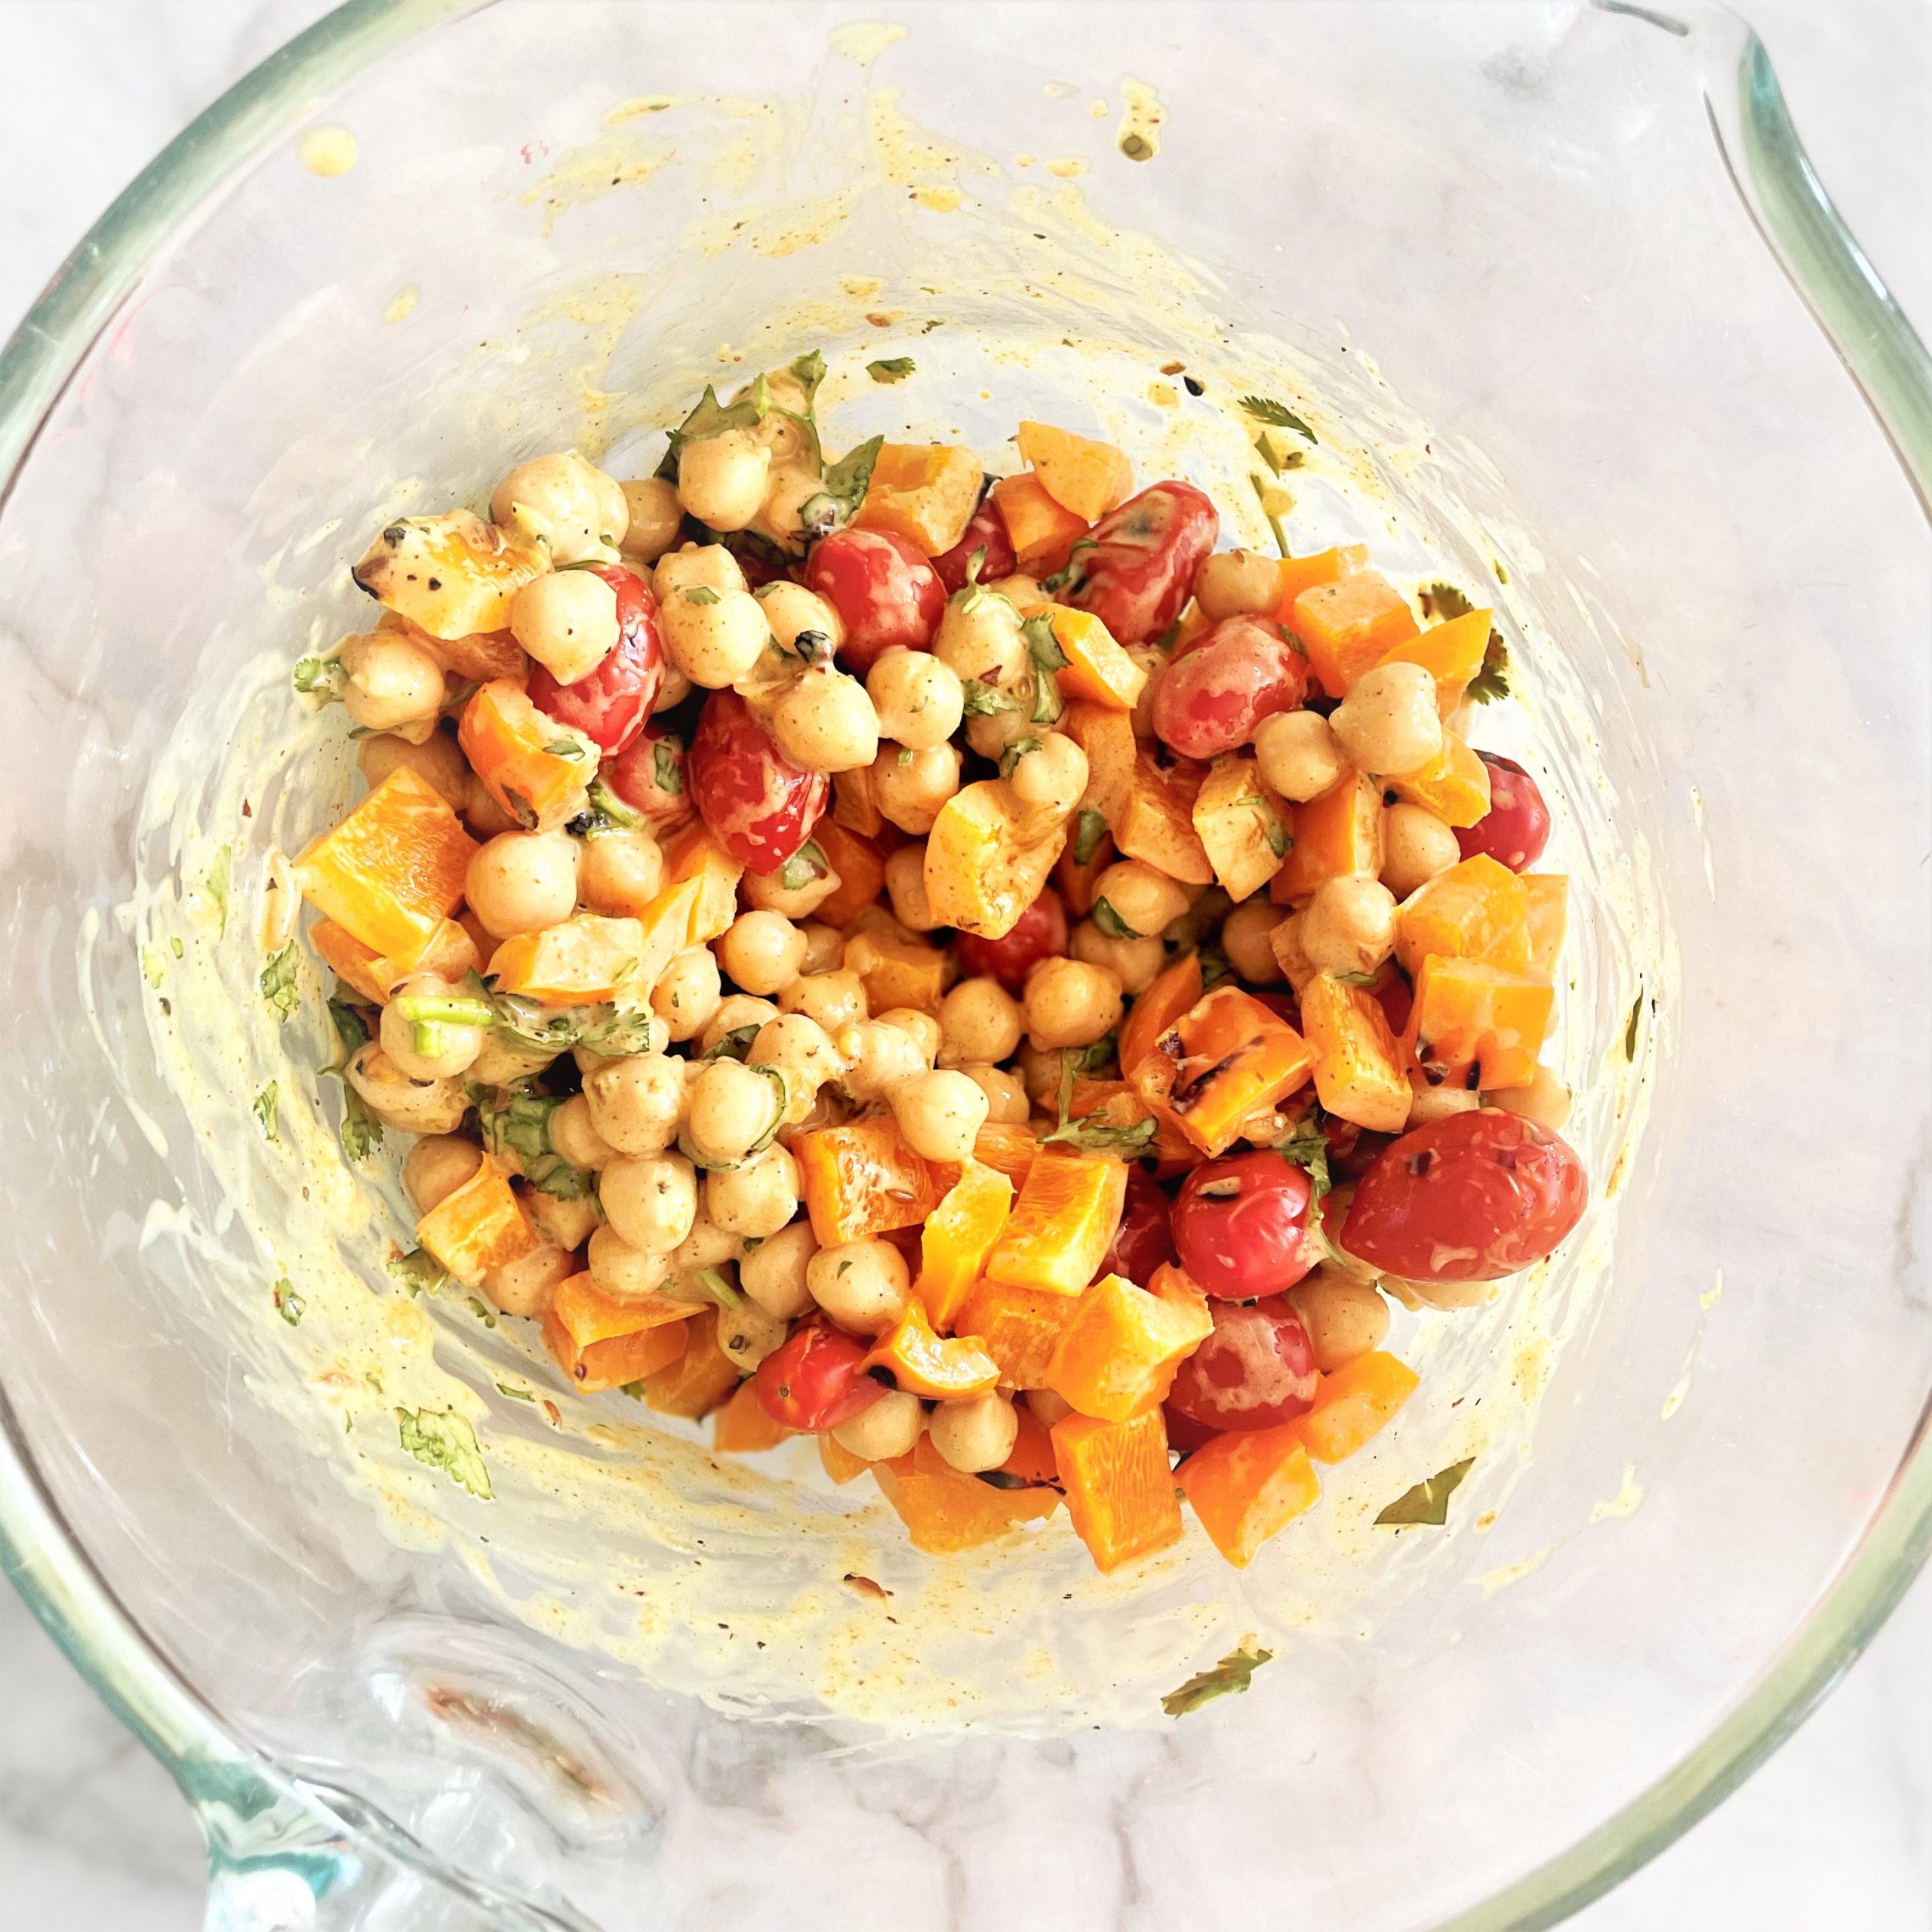 curried chickpea salad with grilled veggies in a glass mixing bowl